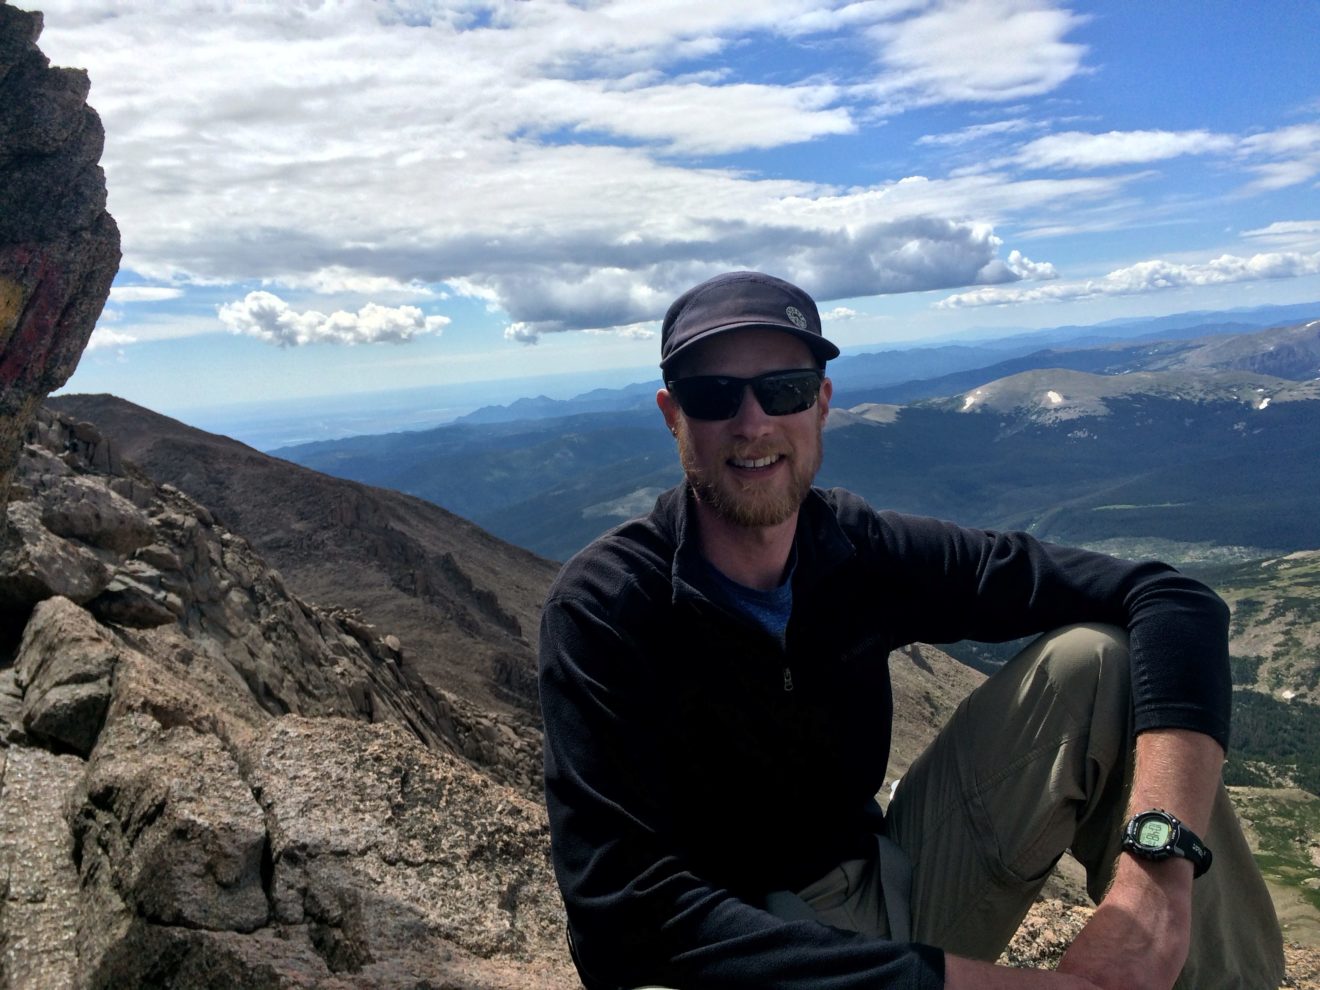 Circuit Media's lead designer, Joe Horton, poses in front of a scenic mountain view in Rocky Mountain National Park.